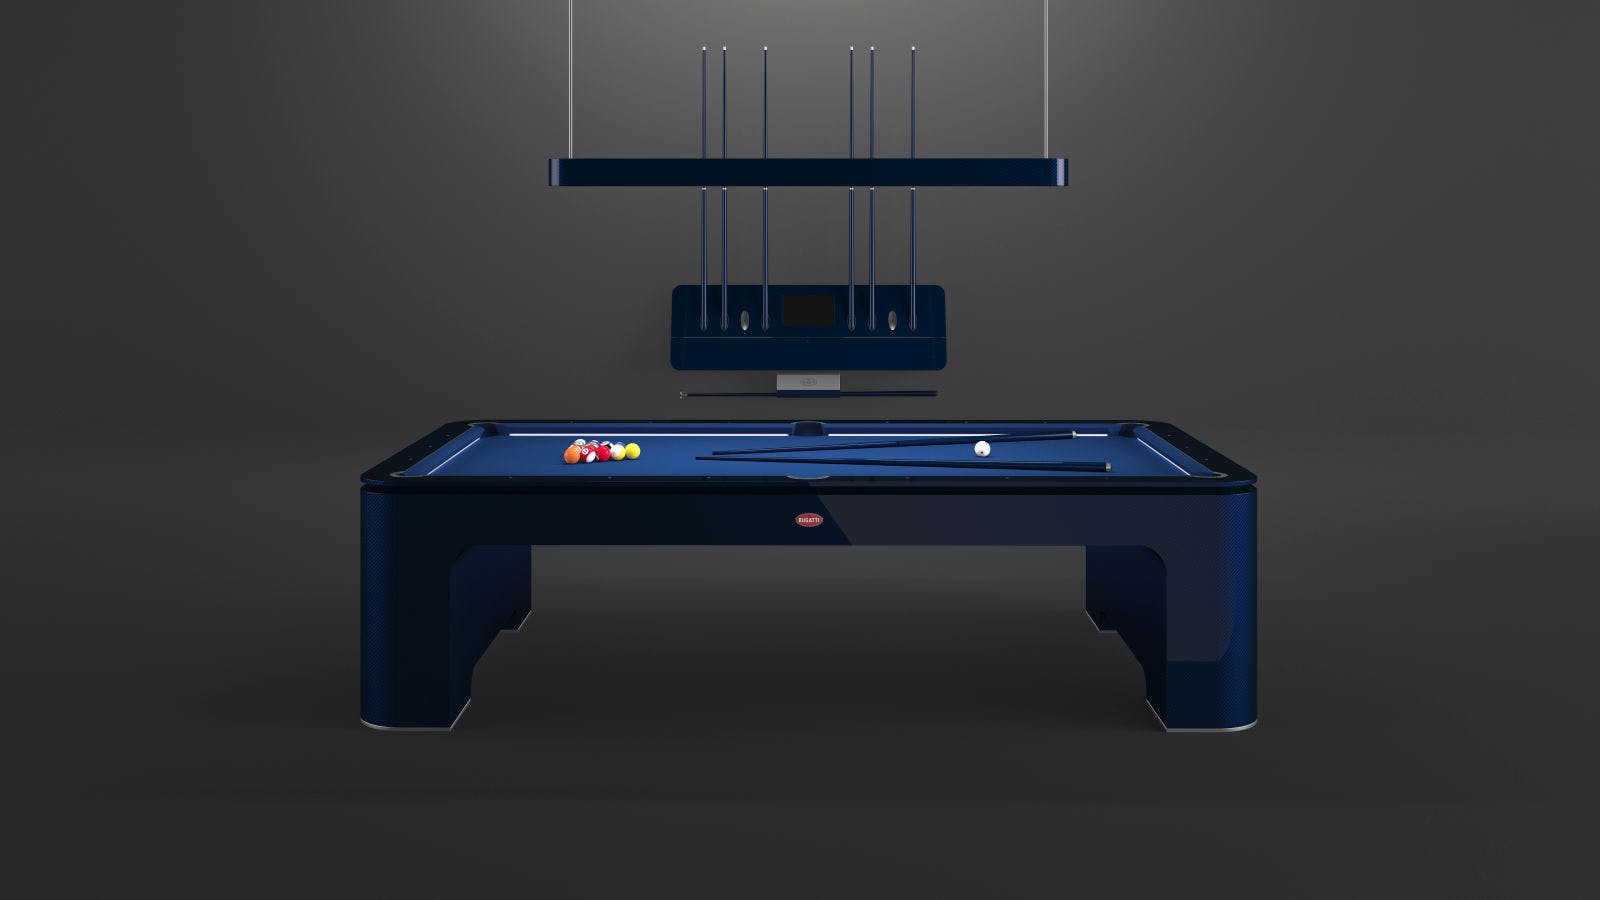 The Bugatti Pool Table, limited to 30 pieces, is available to purchase for €250.000, including the accessories.